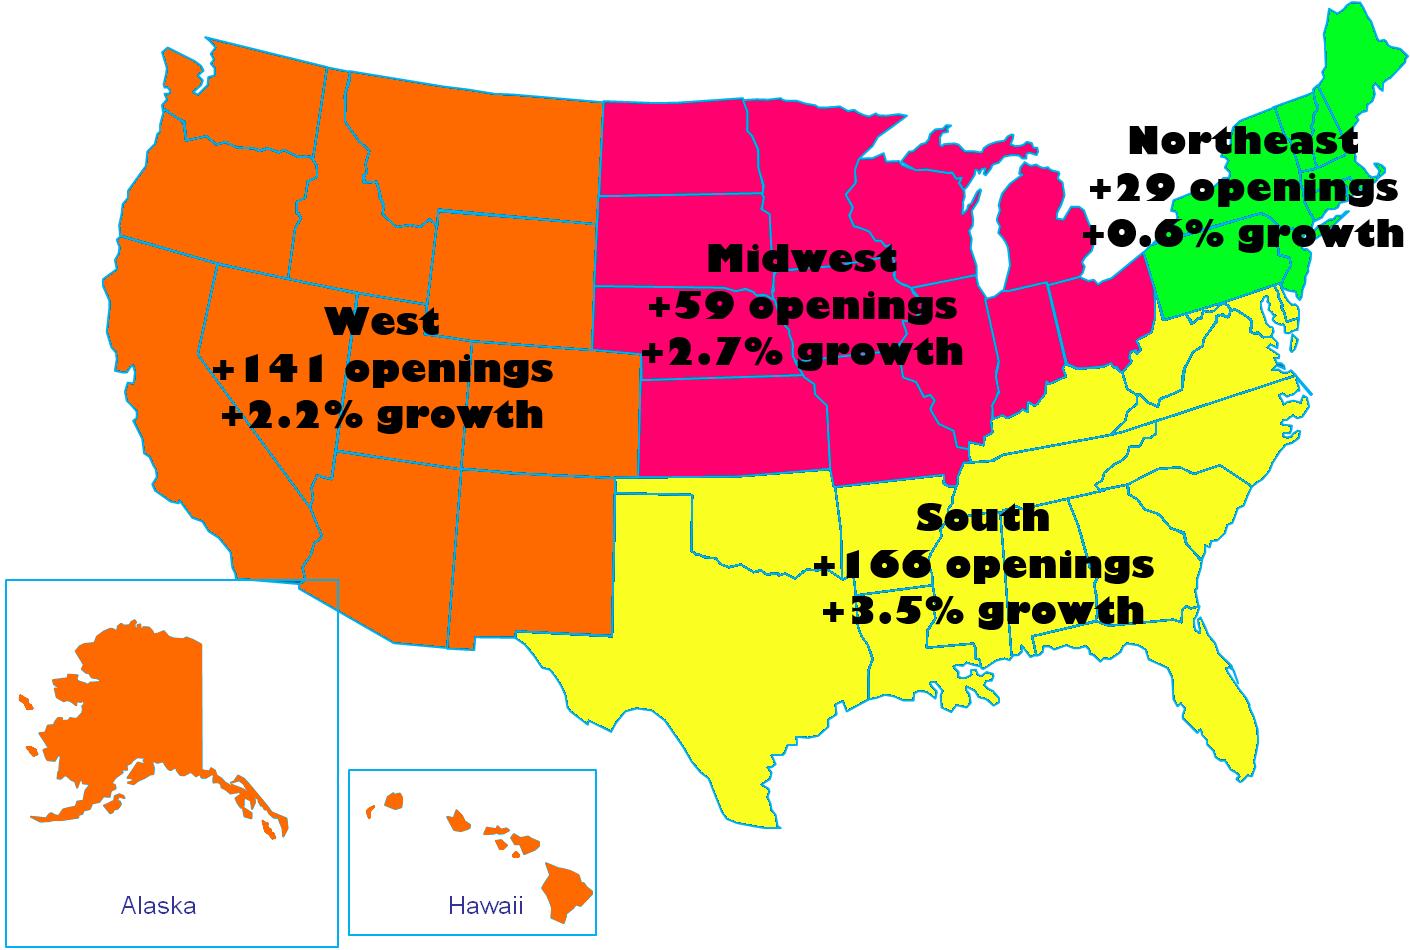 SEO job growth by region: West, Midwest, South, Northeast